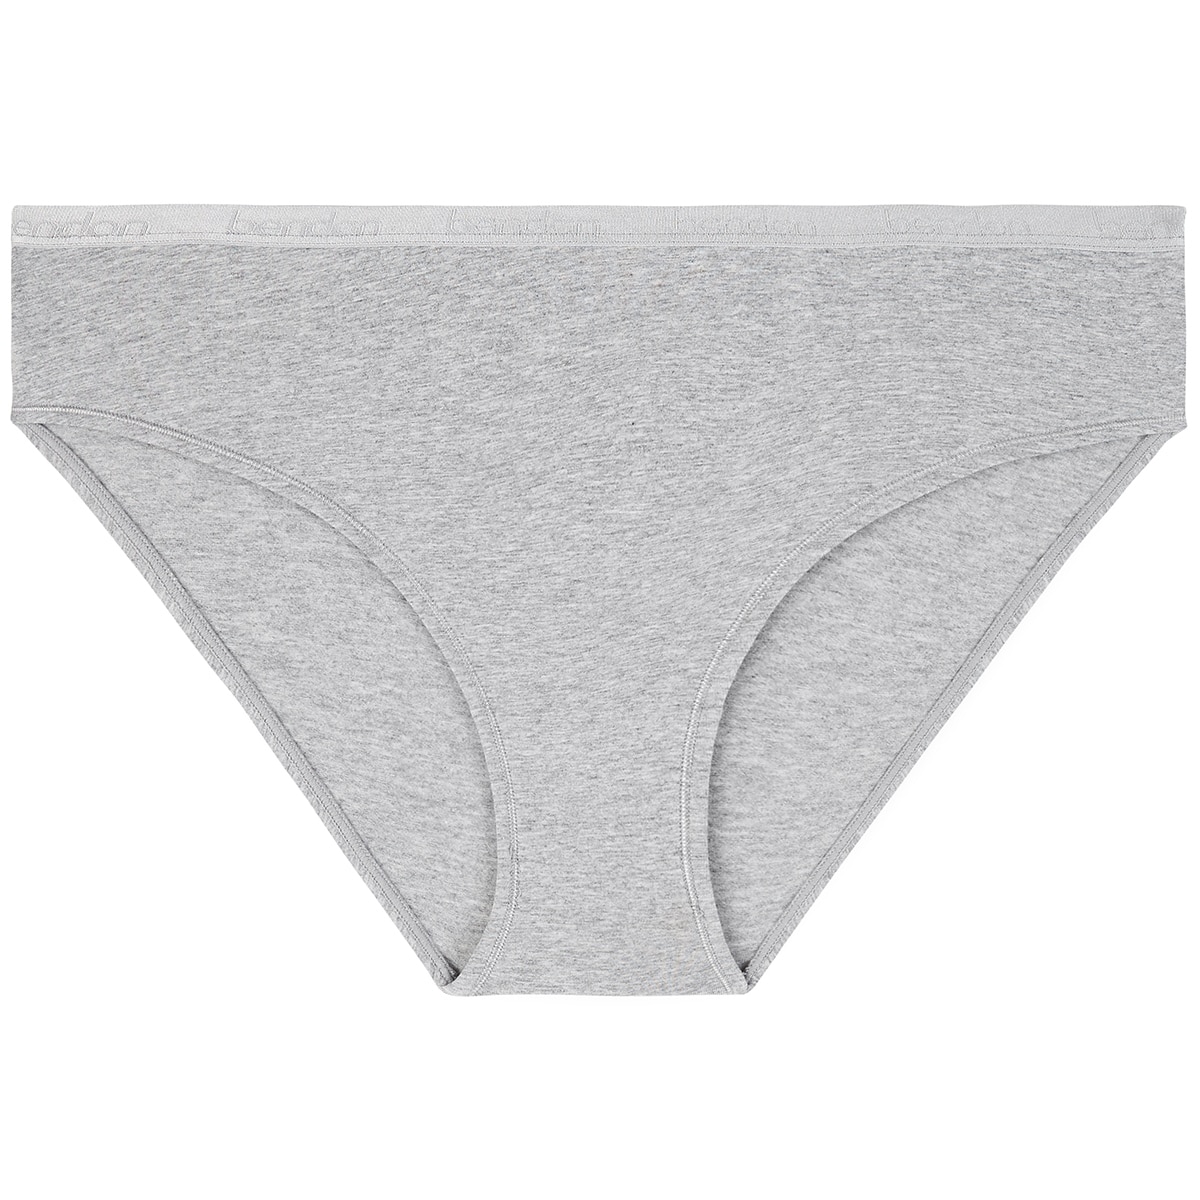 Bendon Comfy Brief 5 Pack - Extra Large